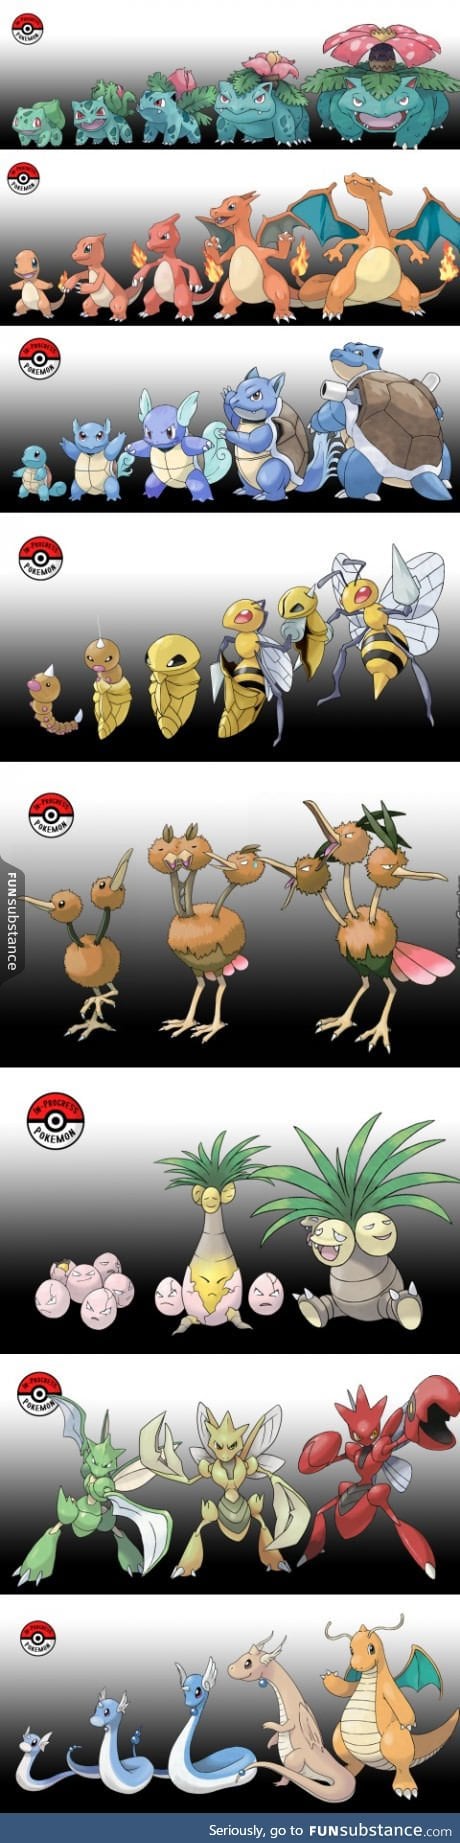 What If Pokemon Didn't Evolve All At Once?